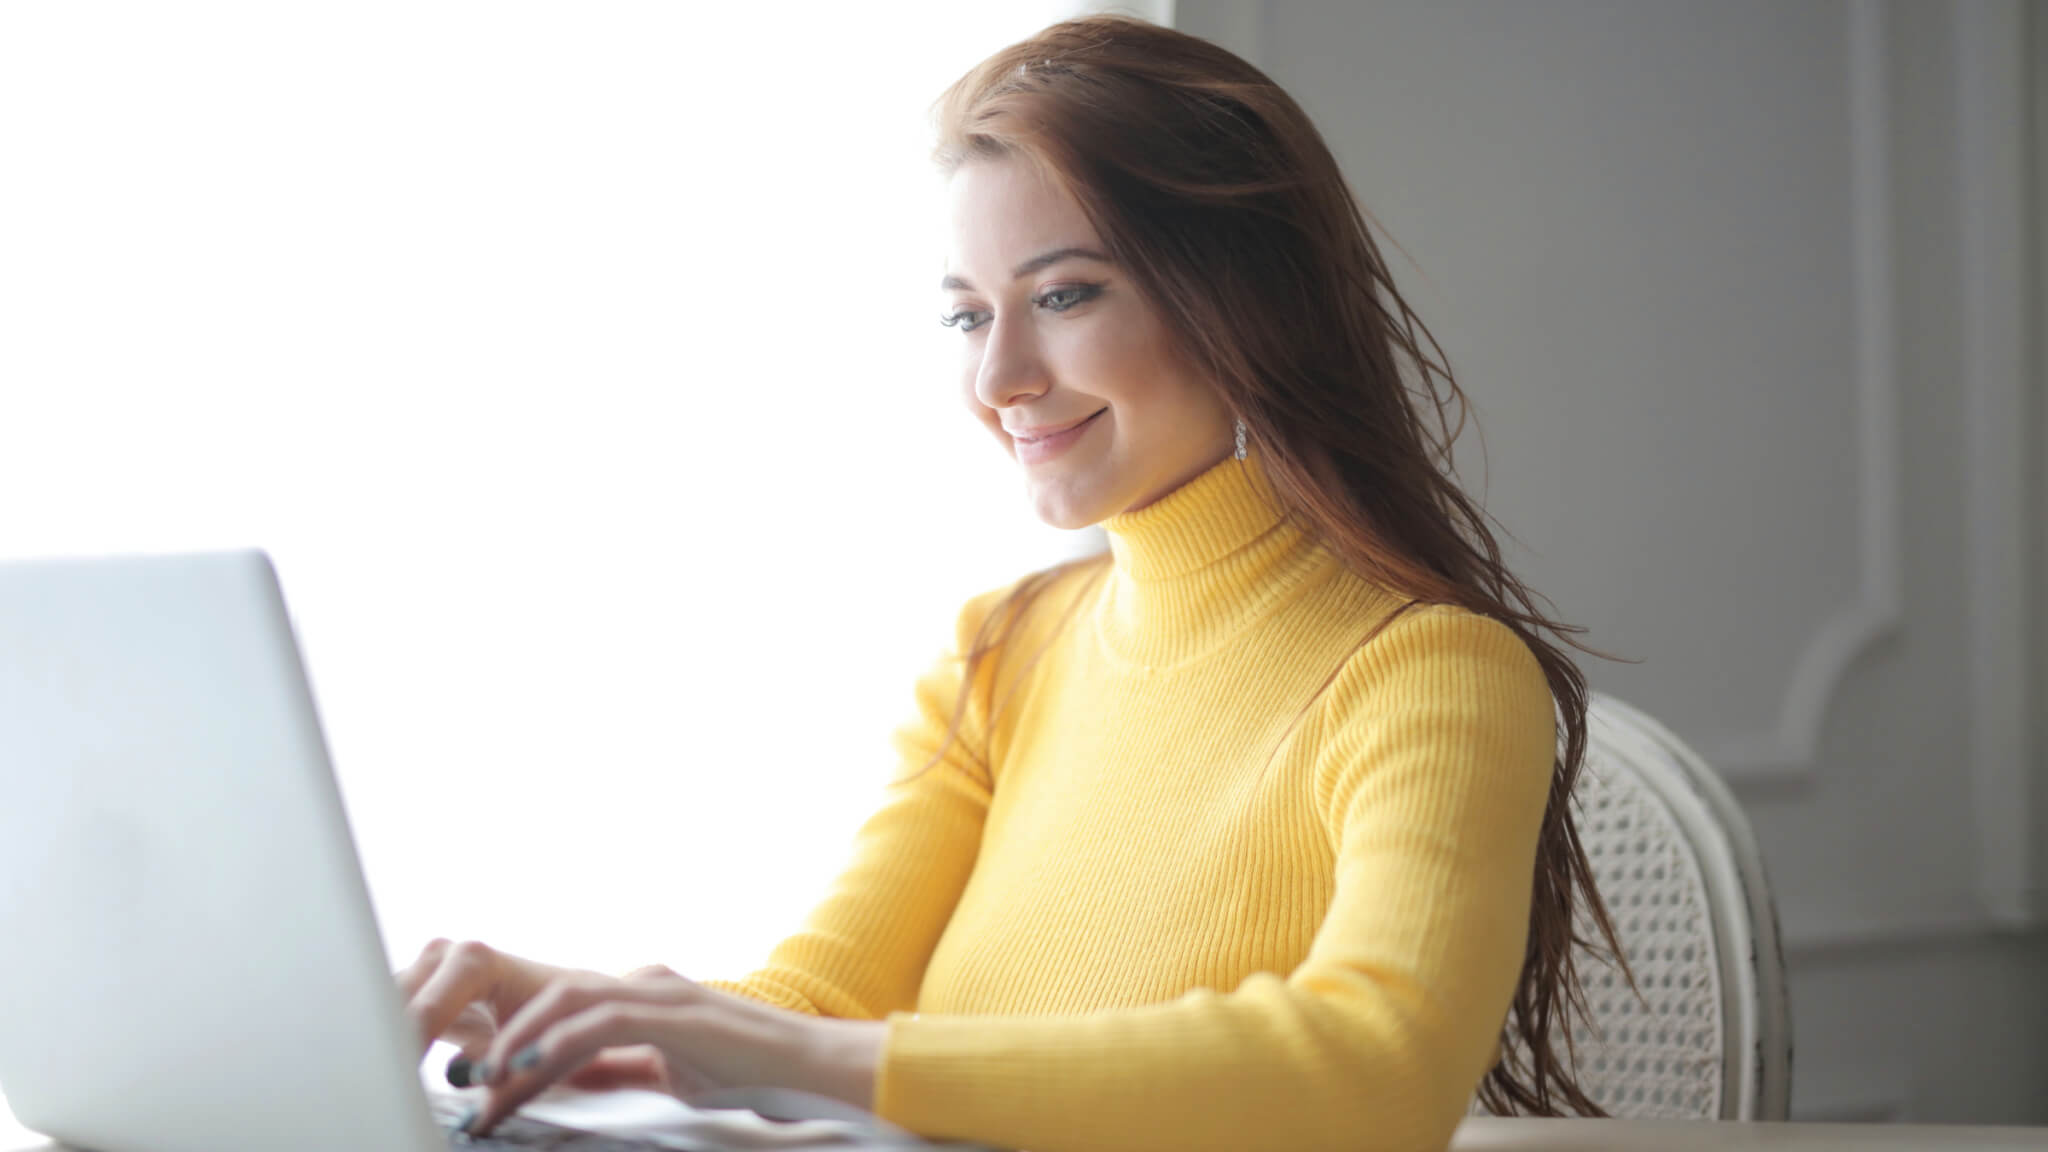 Woman with yellow sweater smiling at laptop